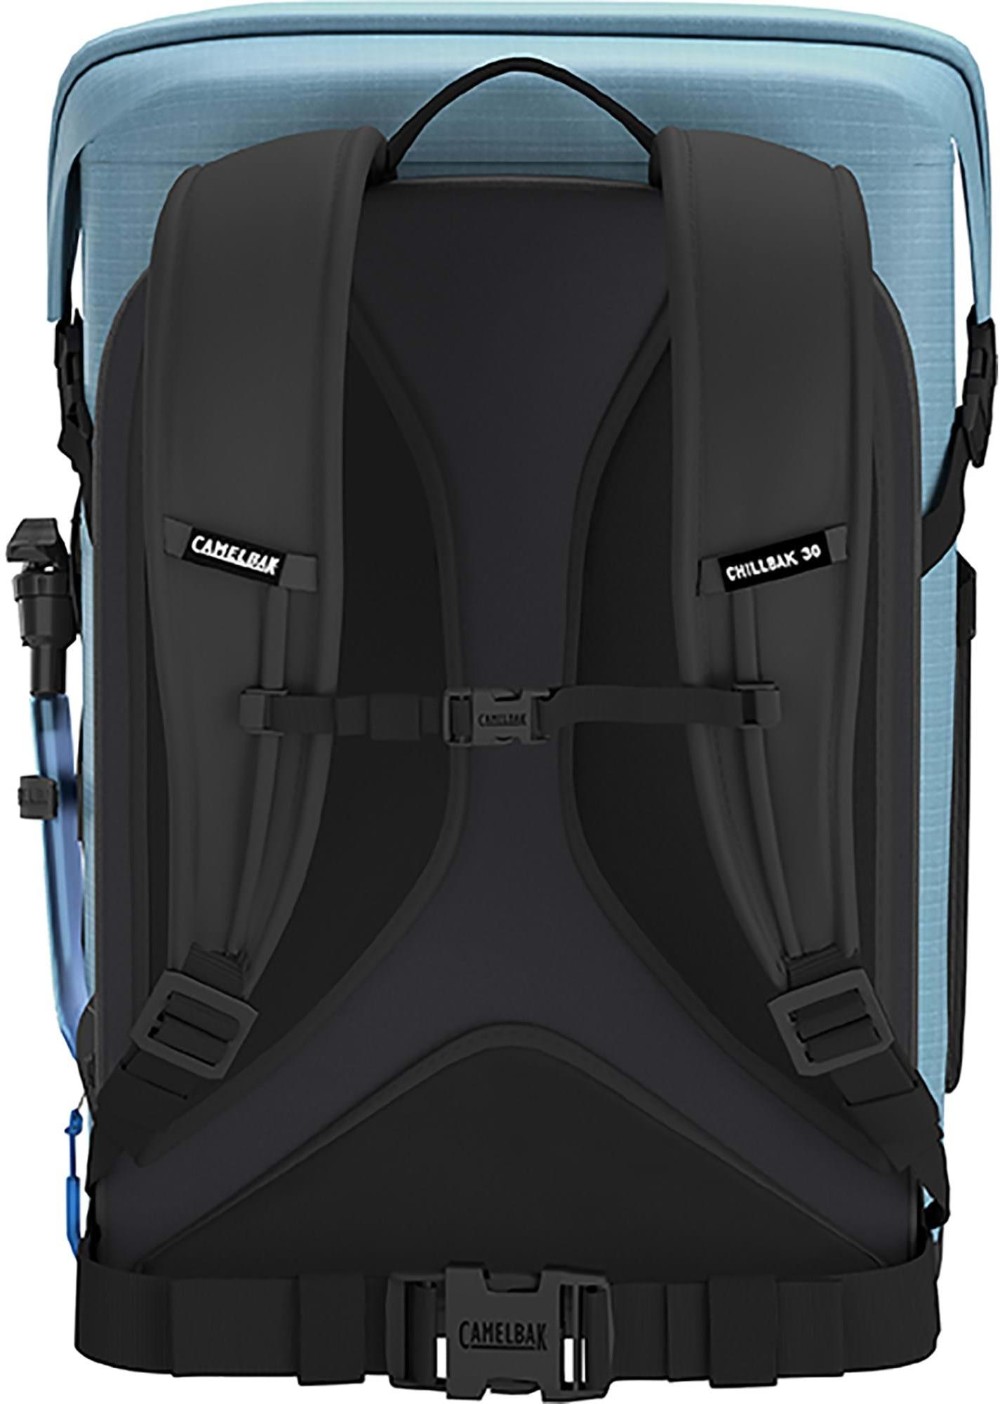 Chillbak 30L Backpack Cooler with 6L Fusion Group Reservoir image 2